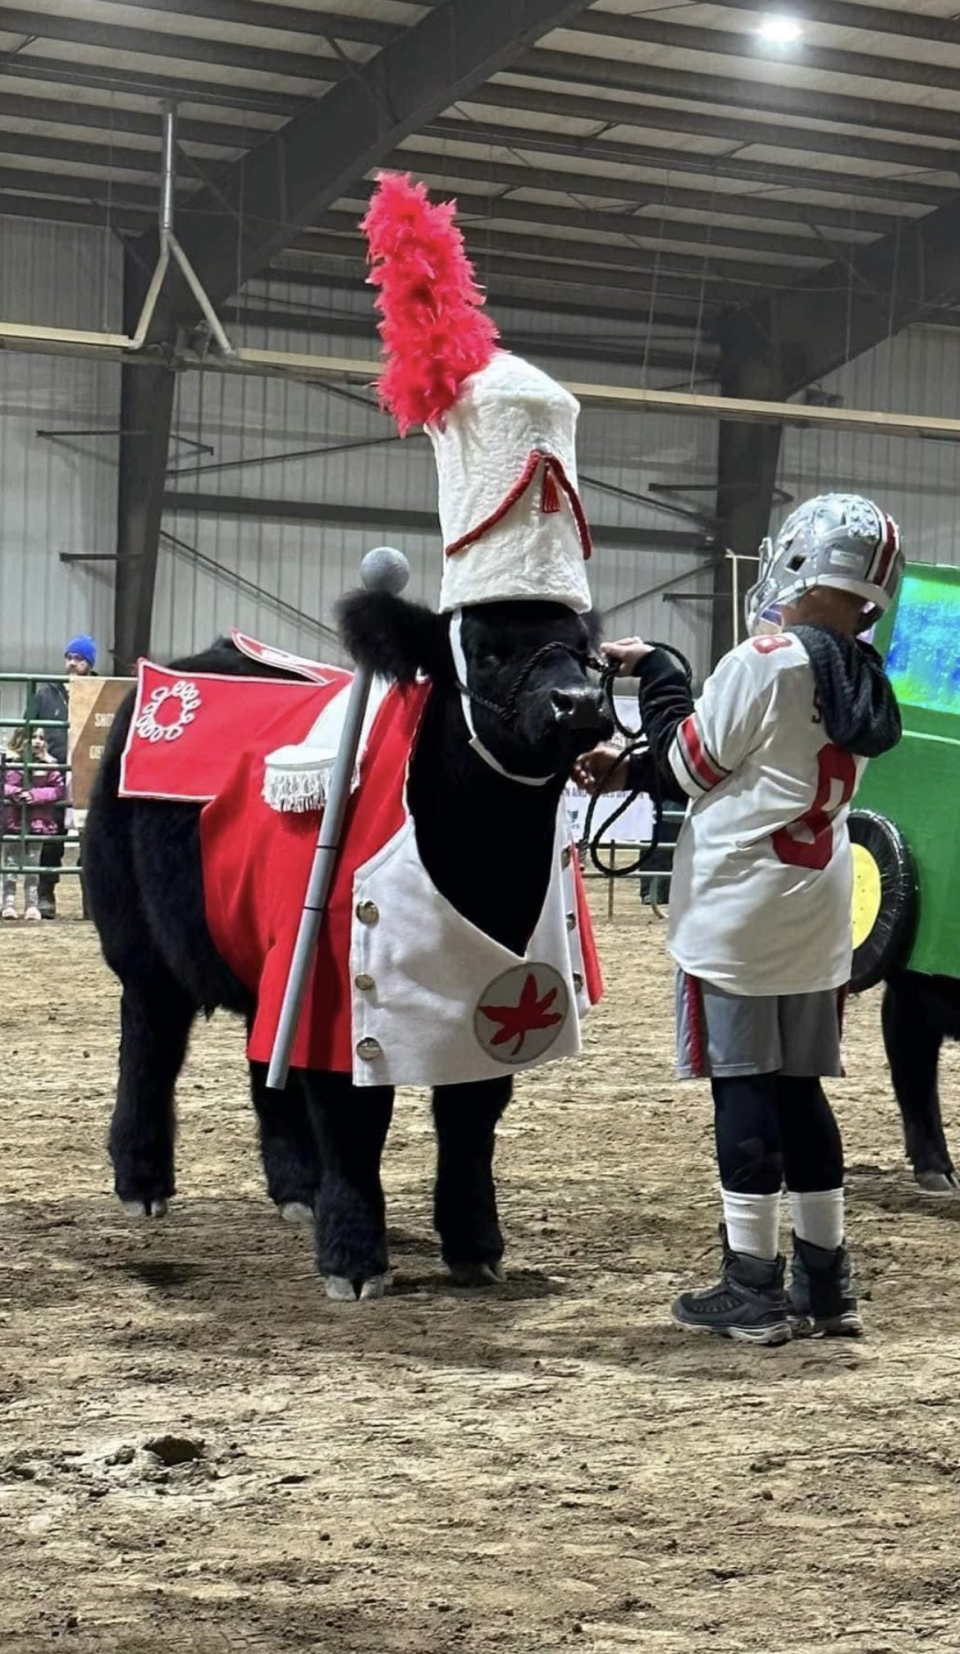 Wayne County 4-H member Owen Bailey dressed his steer Zeus up as an Ohio State University Marching Band Drum Major for the Clark County Cattle Battle.